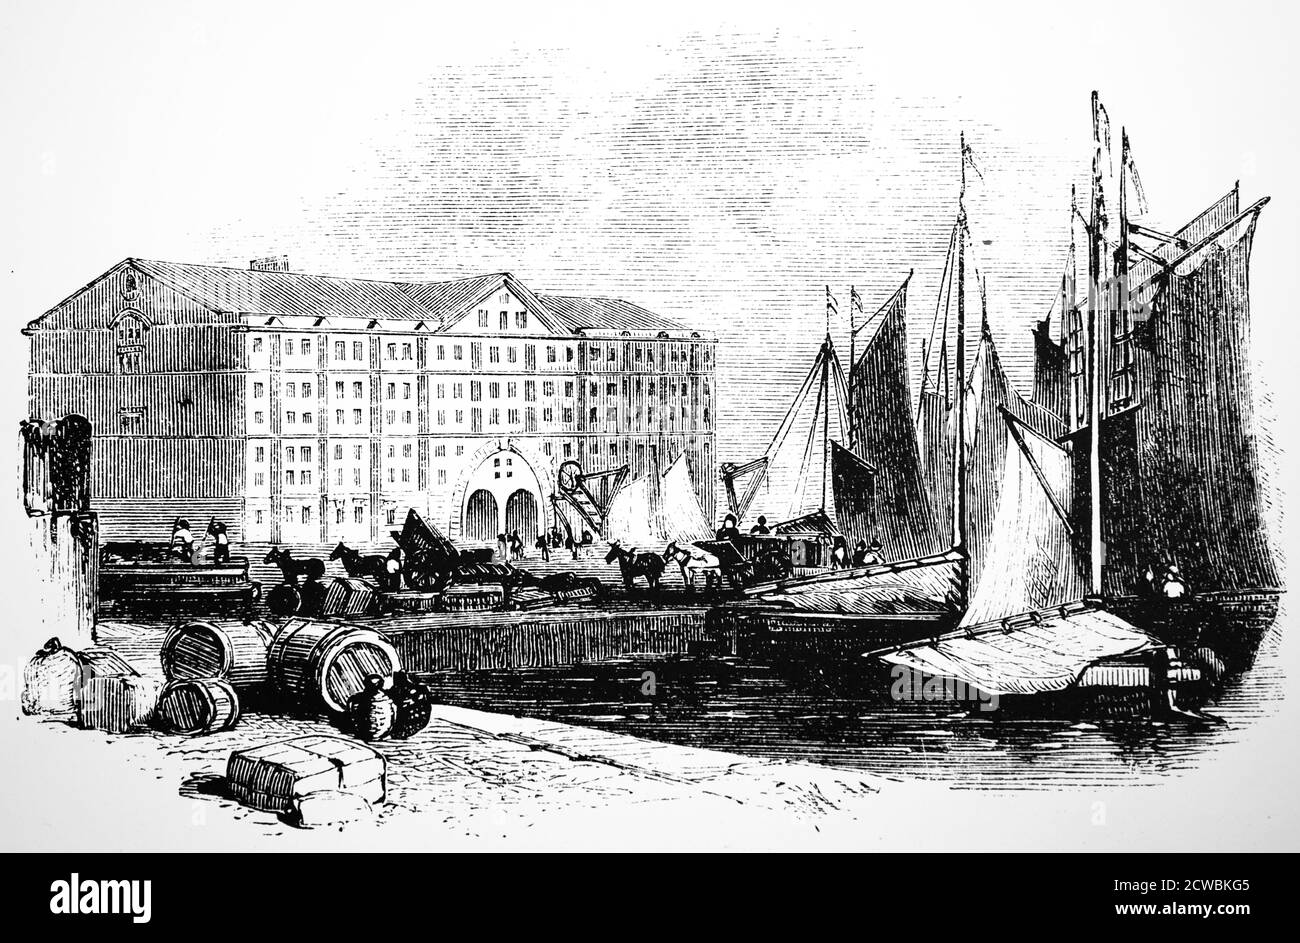 Engraving depicting the Duke's Dock, Liverpool, excavated by James Brindley. Stock Photo